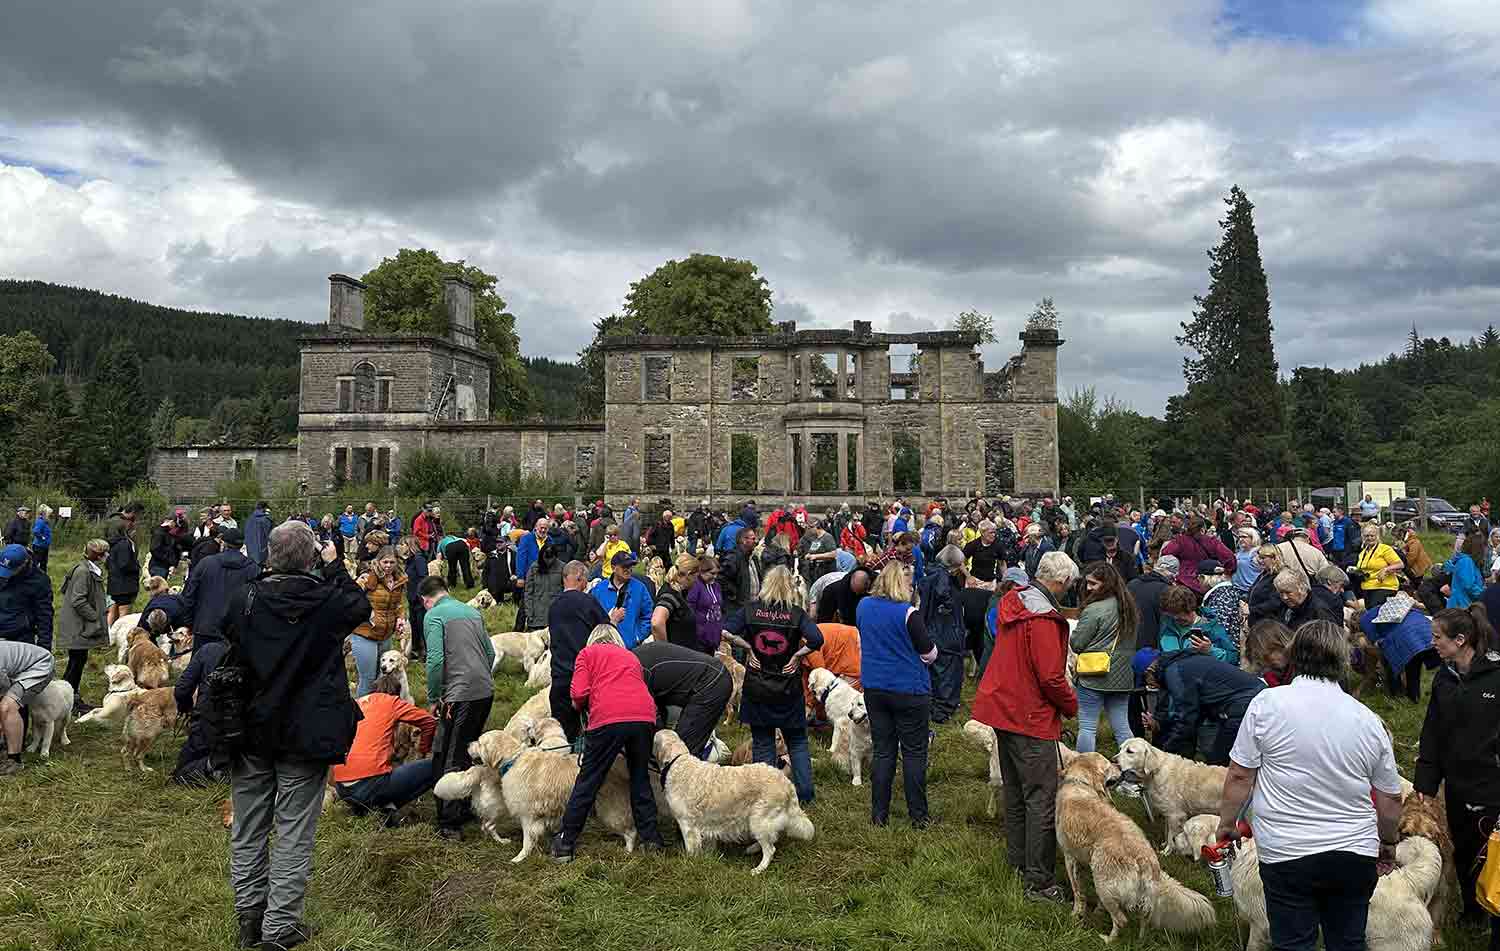 A large number of people and golden retrievers stand on a grassy field in front of the ruins of a building.